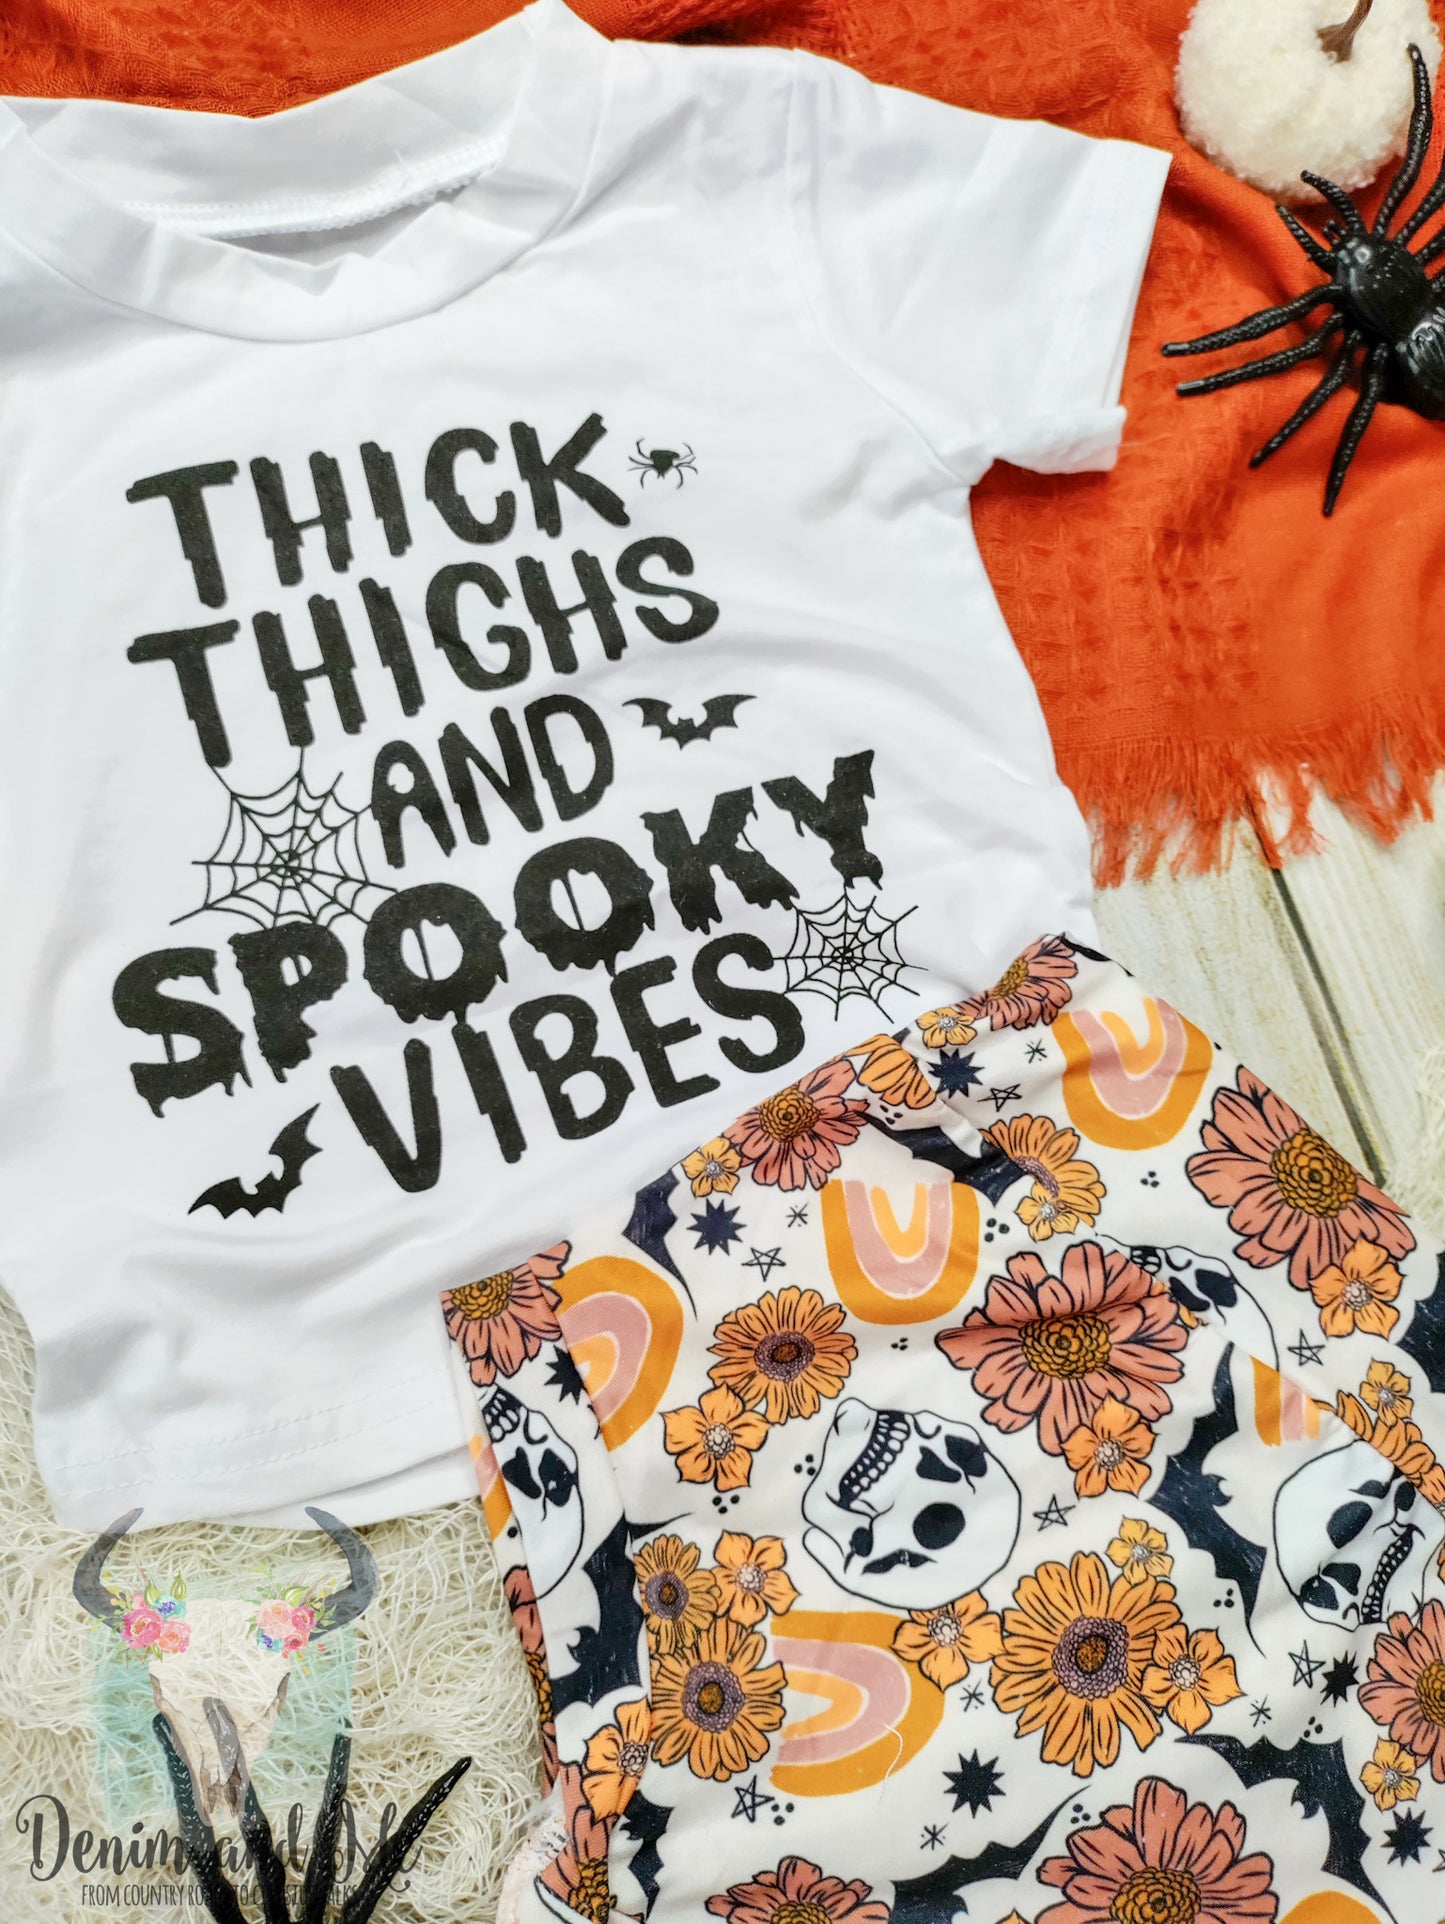 Thick Thighs Spooky Vibes Outfit